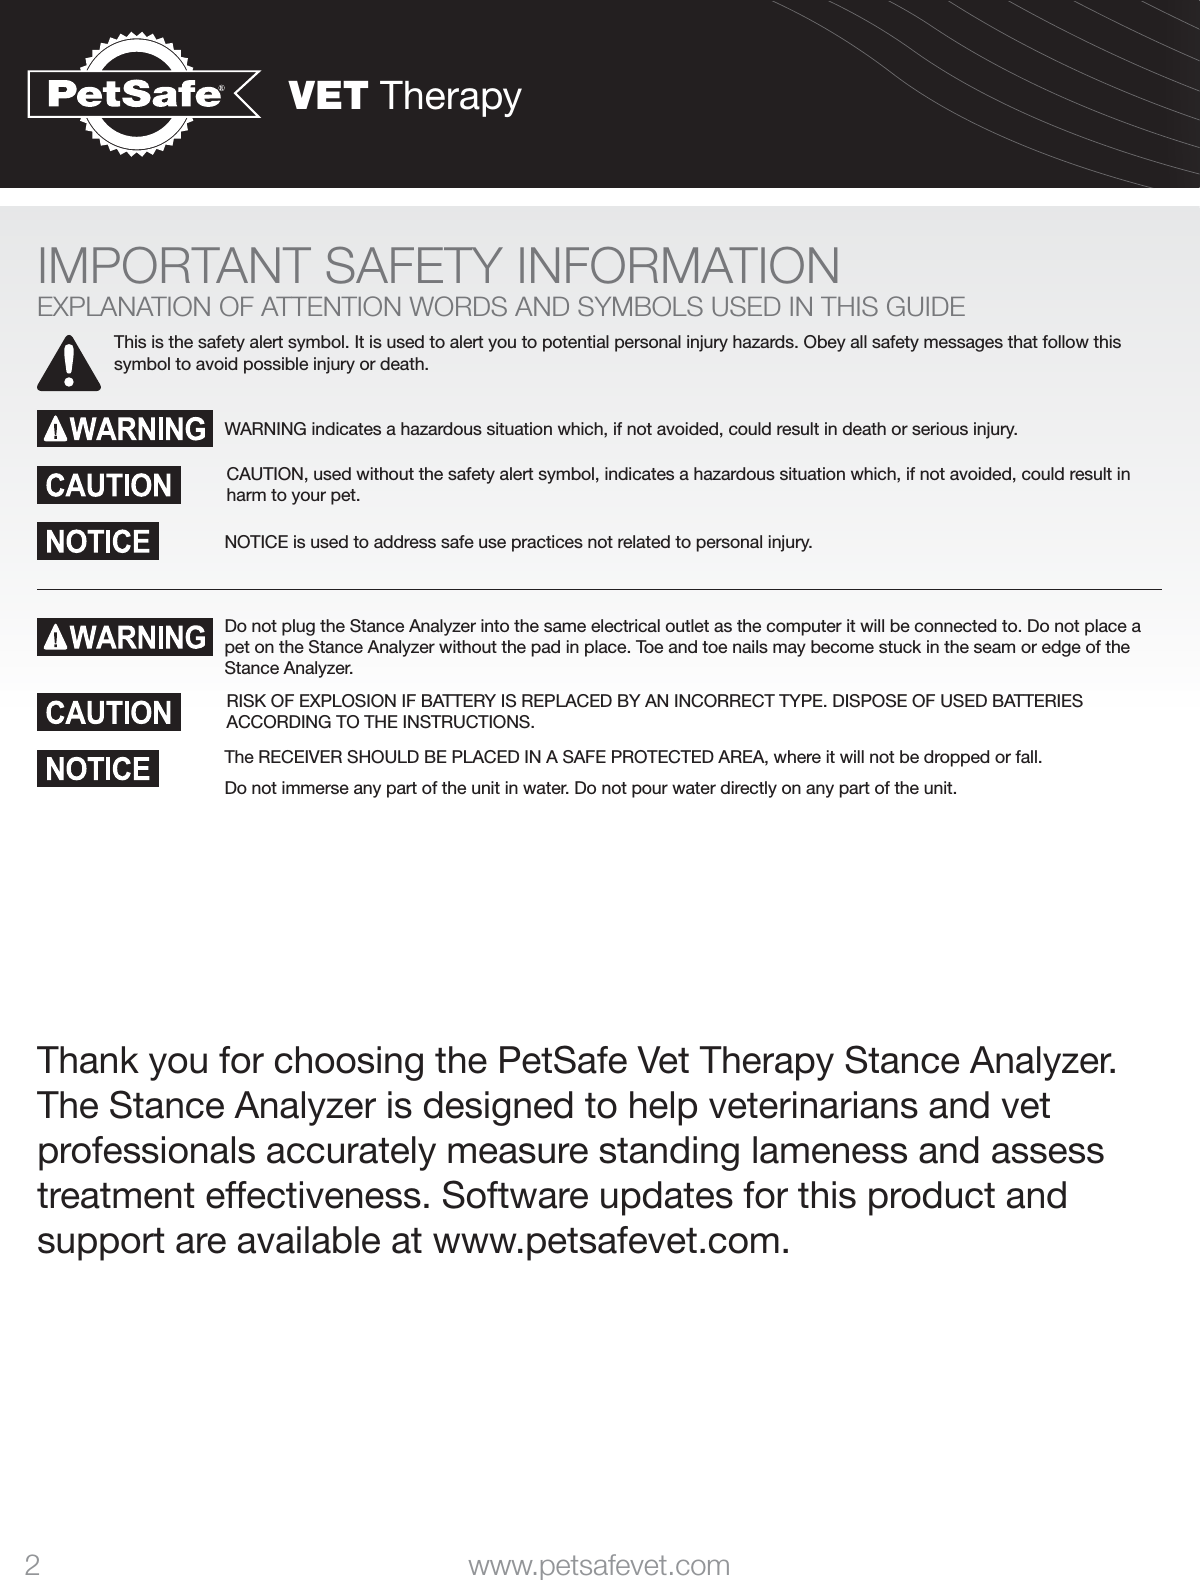 VET Therapy2 www.petsafevet.comIMPORTANT SAFETY INFORMATIONEXPLANATION OF ATTENTION WORDS AND SYMBOLS USED IN THIS GUIDEThis is the safety alert symbol. It is used to alert you to potential personal injury hazards. Obey all safety messages that follow this symbol to avoid possible injury or death.WARNING indicates a hazardous situation which, if not avoided, could result in death or serious injury.CAUTION, used without the safety alert symbol, indicates a hazardous situation which, if not avoided, could result in harm to your pet.NOTICE is used to address safe use practices not related to personal injury.Do not plug the Stance Analyzer into the same electrical outlet as the computer it will be connected to. Do not place a pet on the Stance Analyzer without the pad in place. Toe and toe nails may become stuck in the seam or edge of the Stance Analyzer. RISK OF EXPLOSION IF BATTERY IS REPLACED BY AN INCORRECT TYPE. DISPOSE OF USED BATTERIES ACCORDING TO THE INSTRUCTIONS.The RECEIVER SHOULD BE PLACED IN A SAFE PROTECTED AREA, where it will not be dropped or fall.Do not immerse any part of the unit in water. Do not pour water directly on any part of the unit.Thank you for choosing the PetSafe Vet Therapy Stance Analyzer. The Stance Analyzer is designed to help veterinarians and vet professionals accurately measure standing lameness and assess treatment effectiveness. Software updates for this product and support are available at www.petsafevet.com.